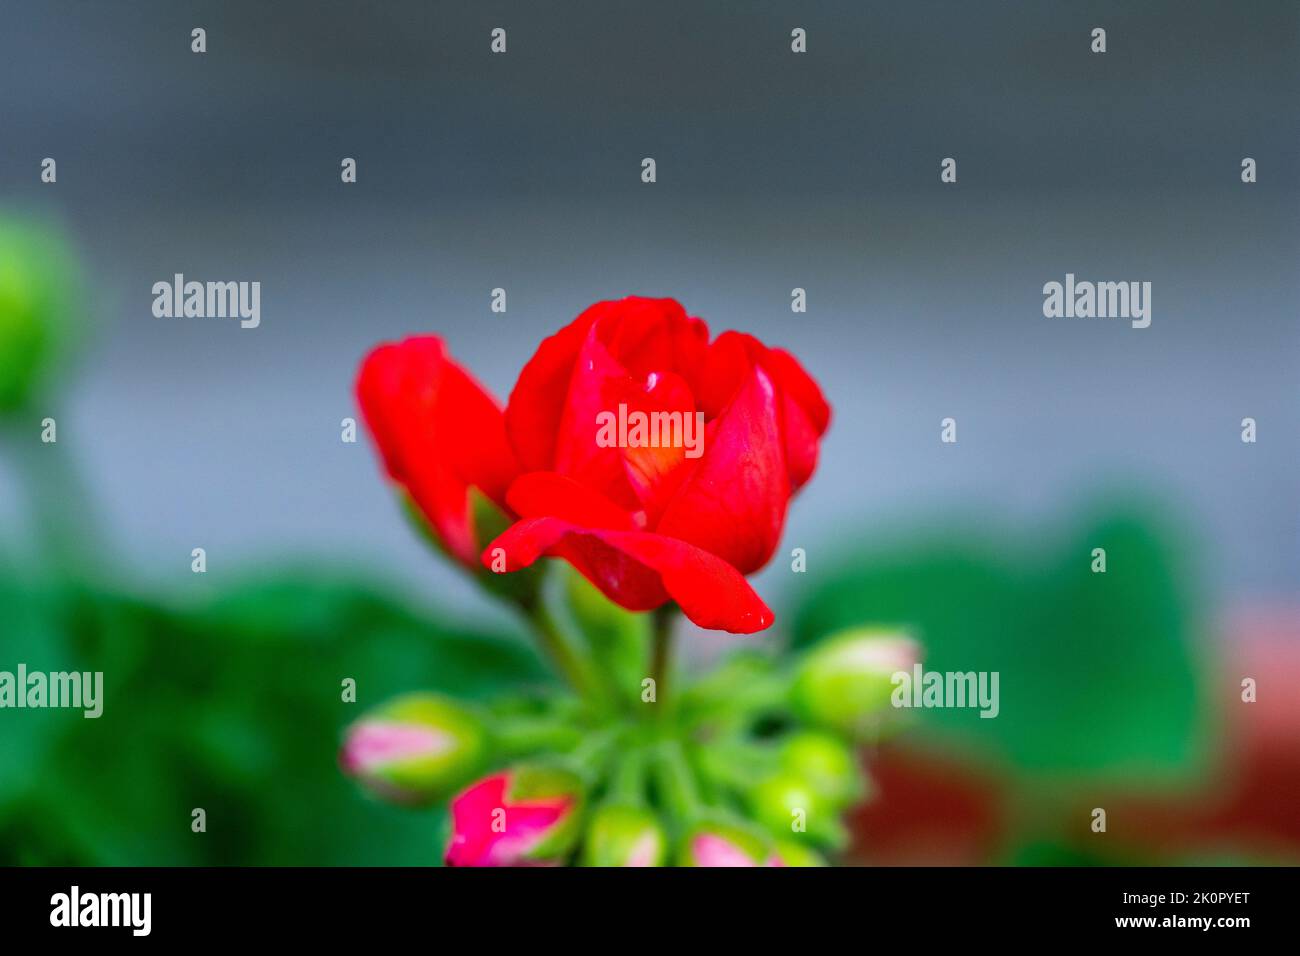 Geraniums flowers blooming in spring and summer against a blurred background. Stock Photo